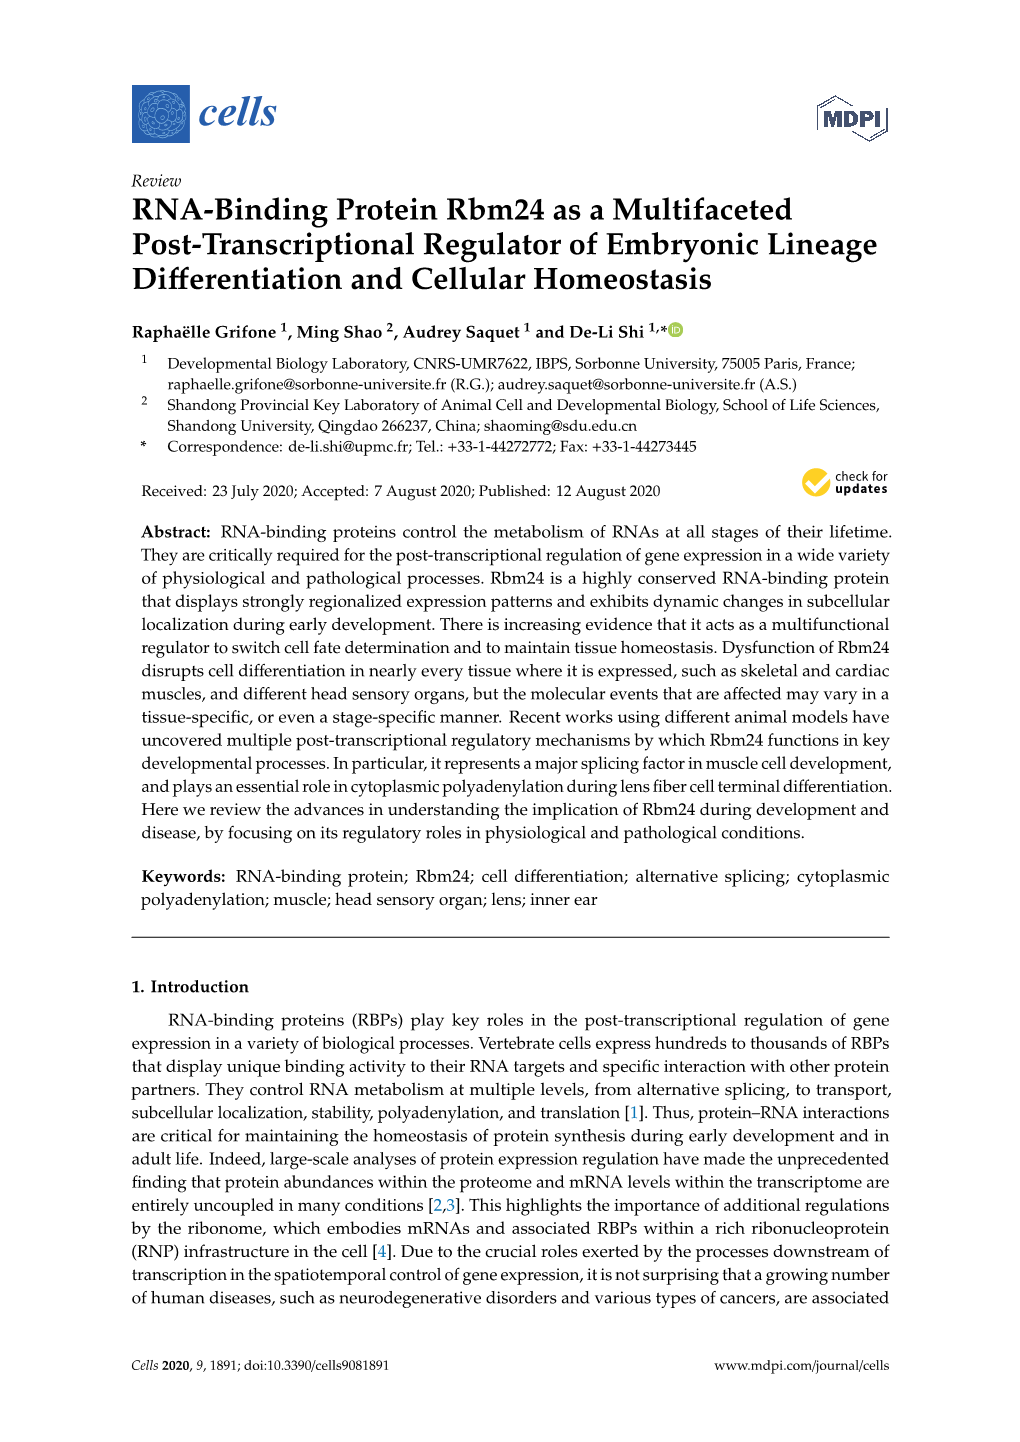 RNA-Binding Protein Rbm24 As a Multifaceted Post-Transcriptional Regulator of Embryonic Lineage Diﬀerentiation and Cellular Homeostasis